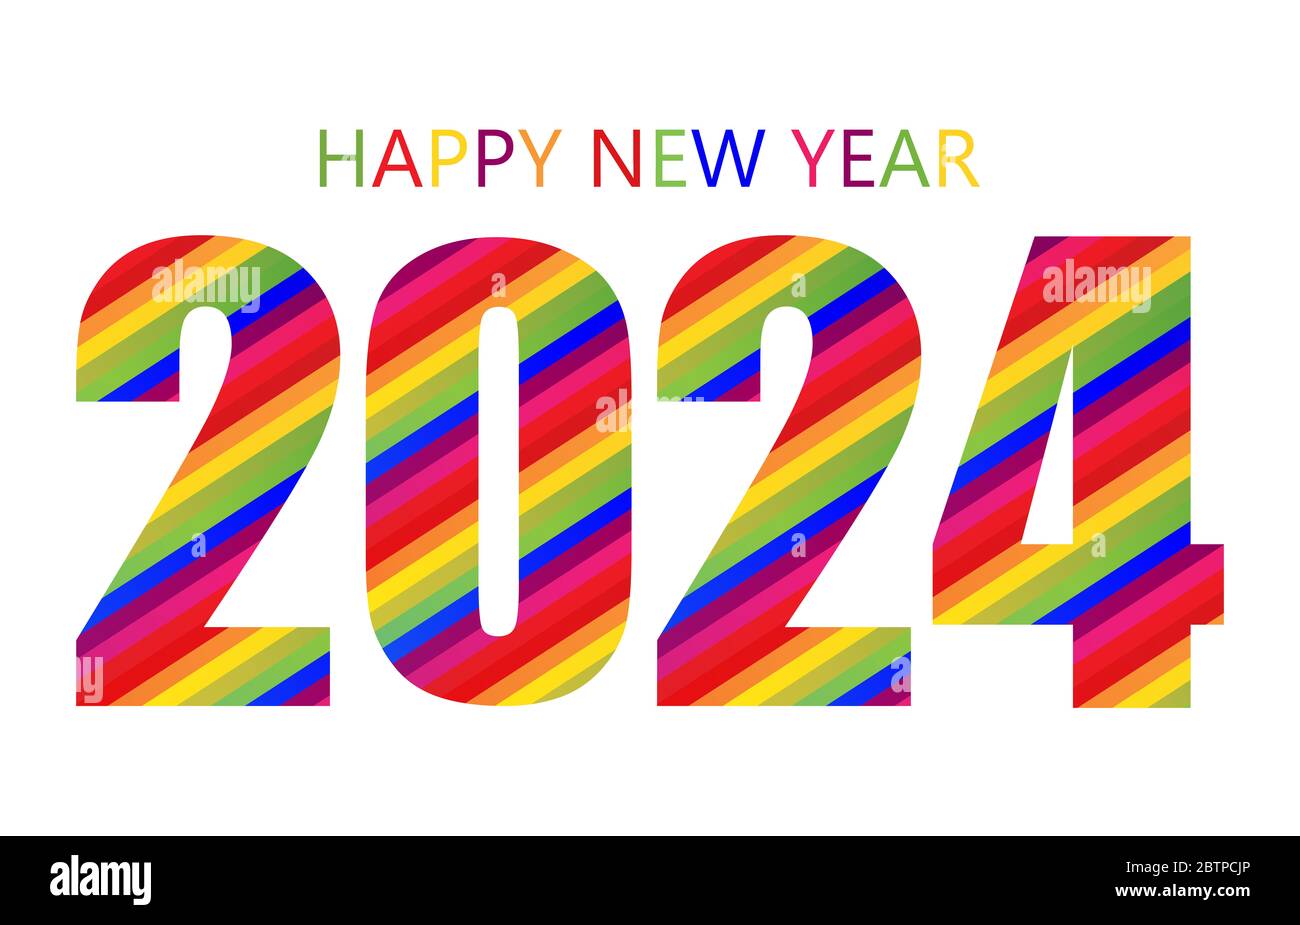 Rainbow Happy New Year 2024 Design Template Modern Design For Calendar Invitations Greeting Cards Holidays Flyers Or Prints 2BTPCJP 